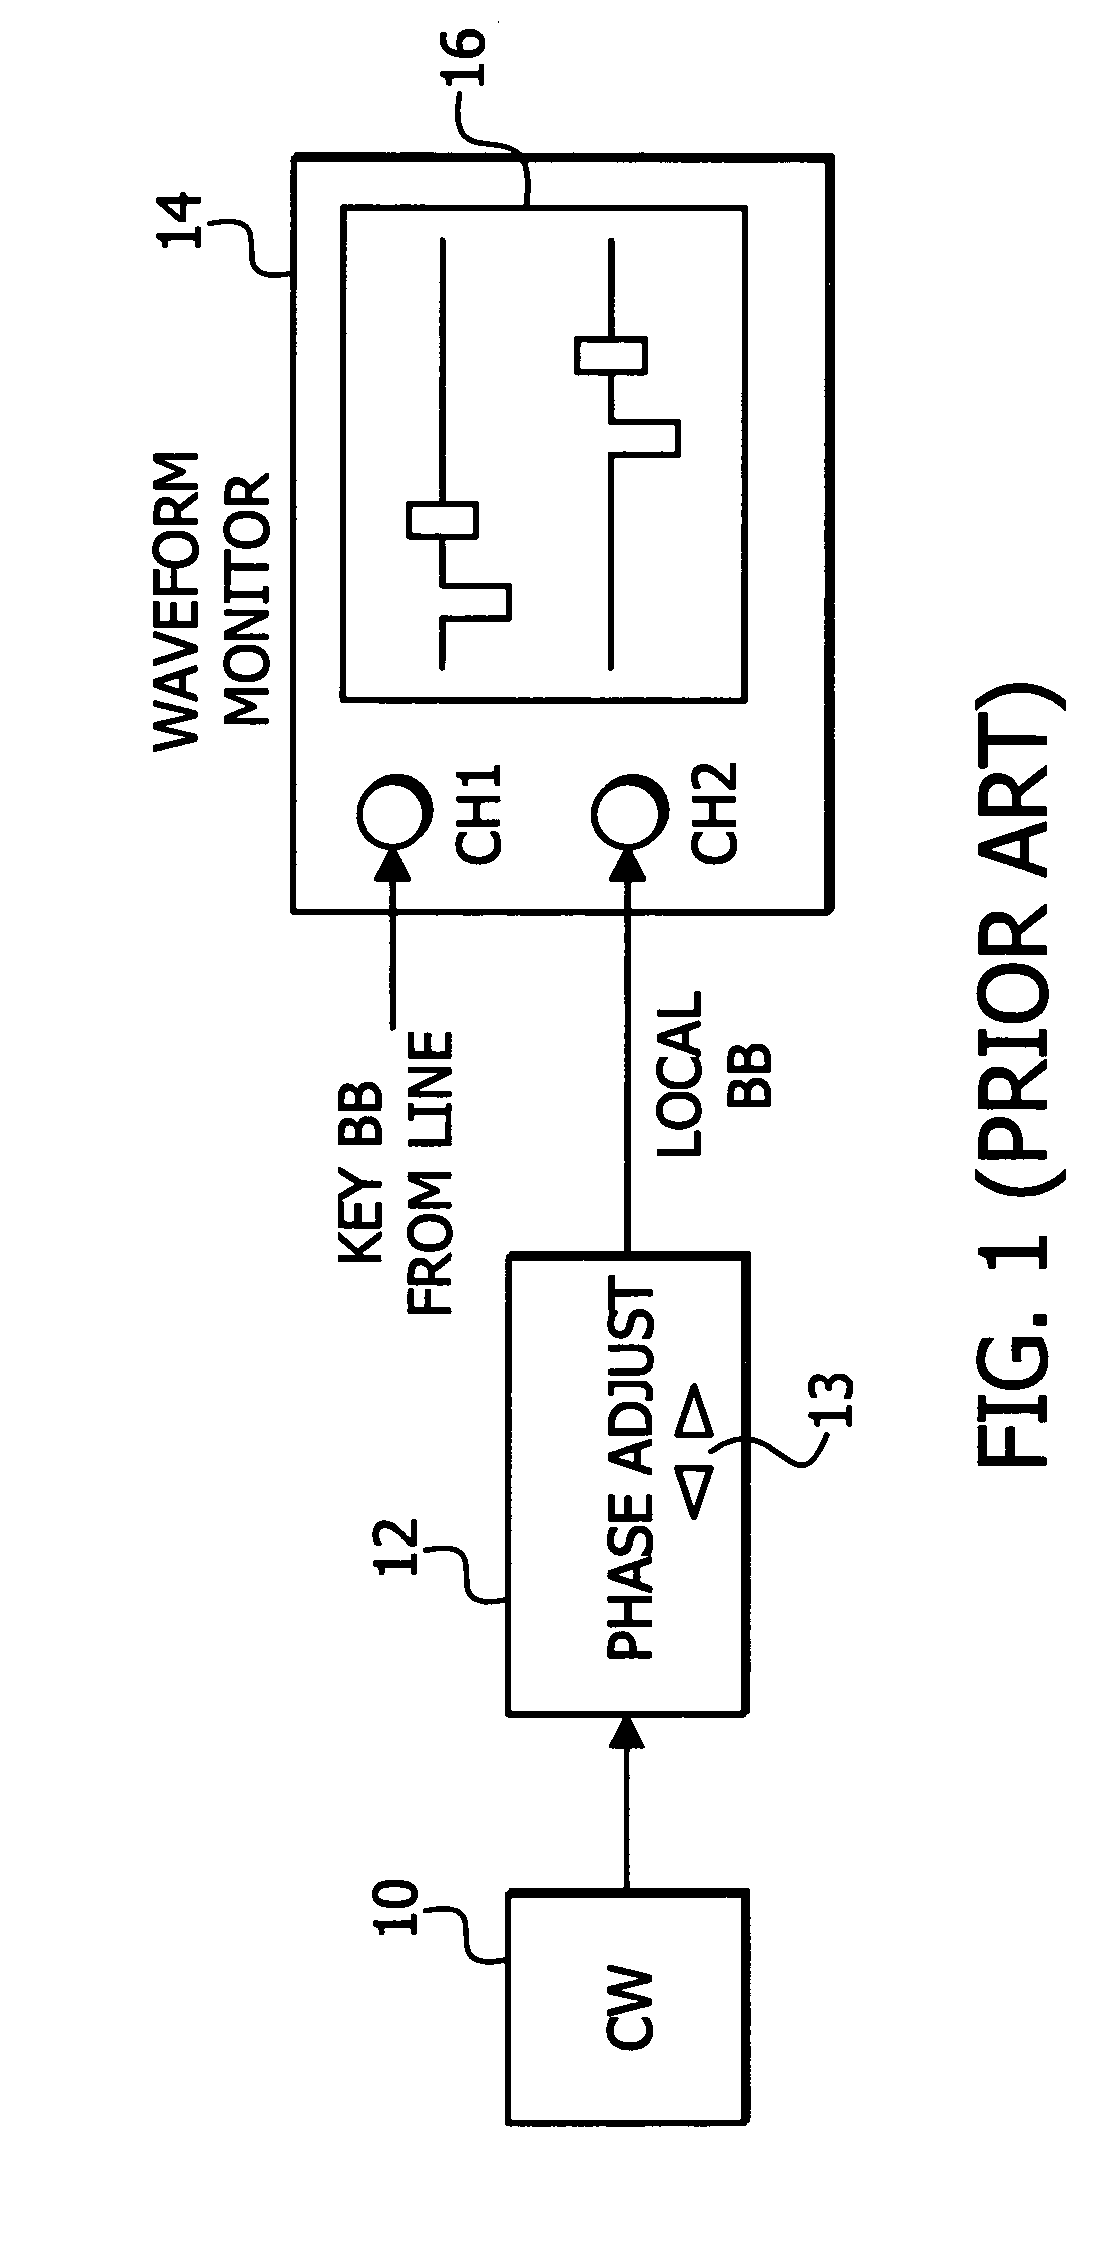 Method and apparatus for generating a reference television signal